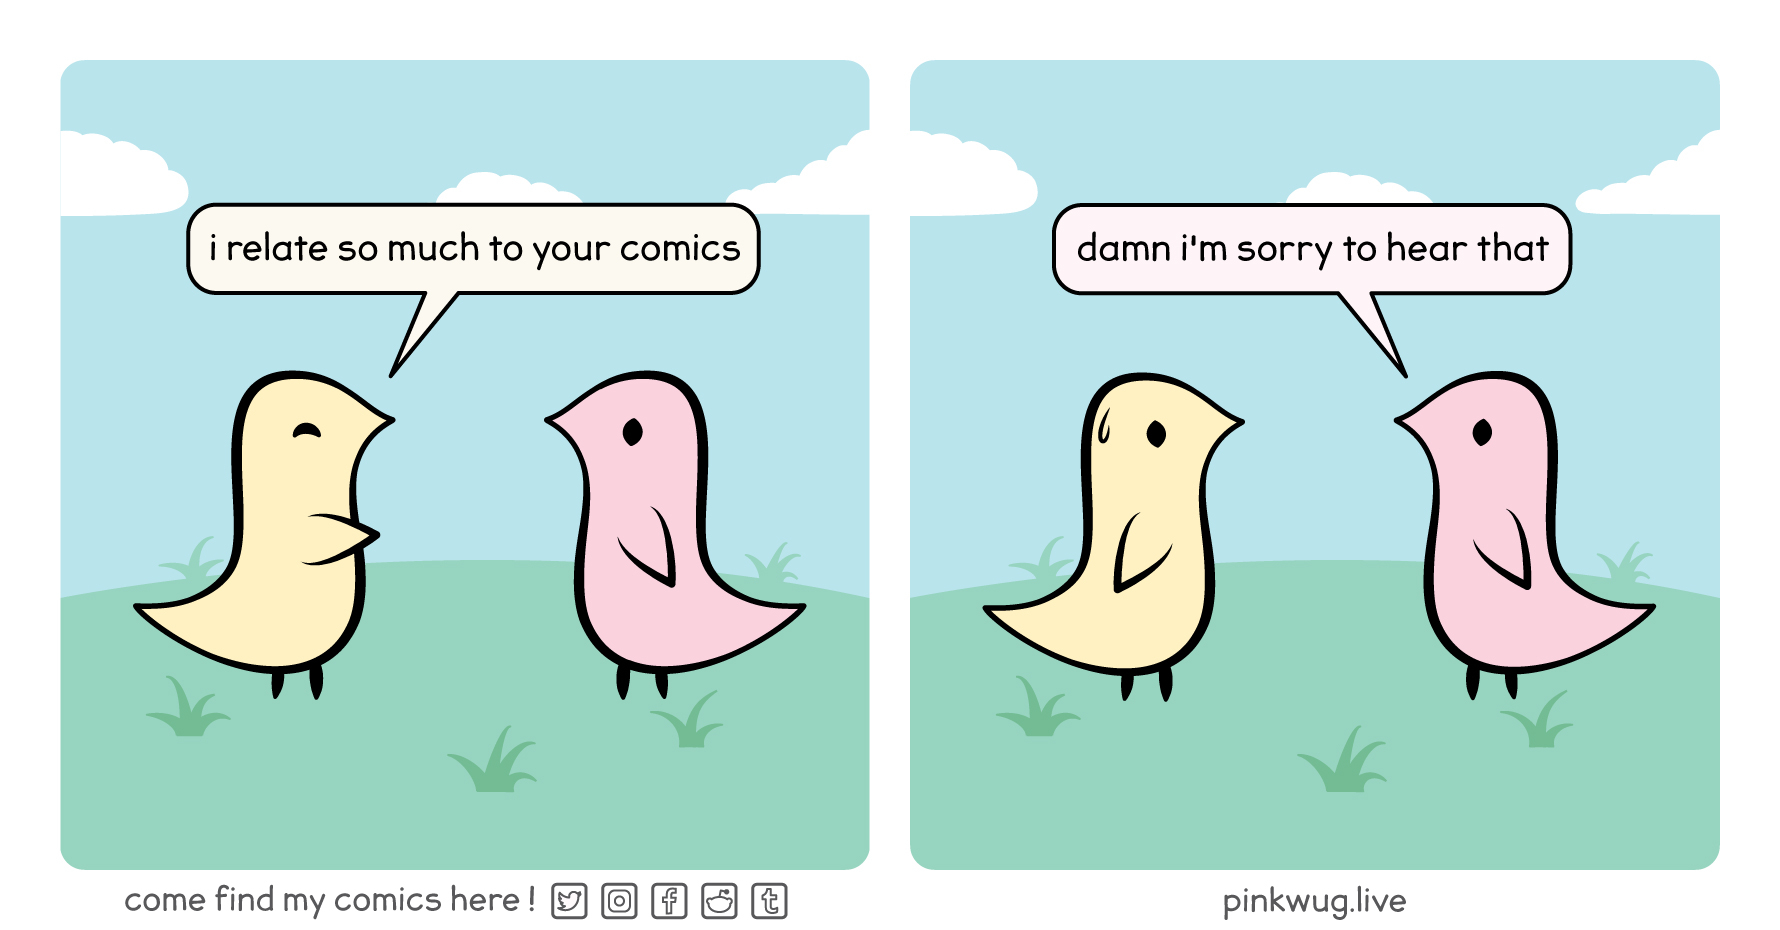 pinkwug comic: Yellow wug says 'I relate so much to your comics'.
Pinkwug replies: damn I'm sorry to hear that